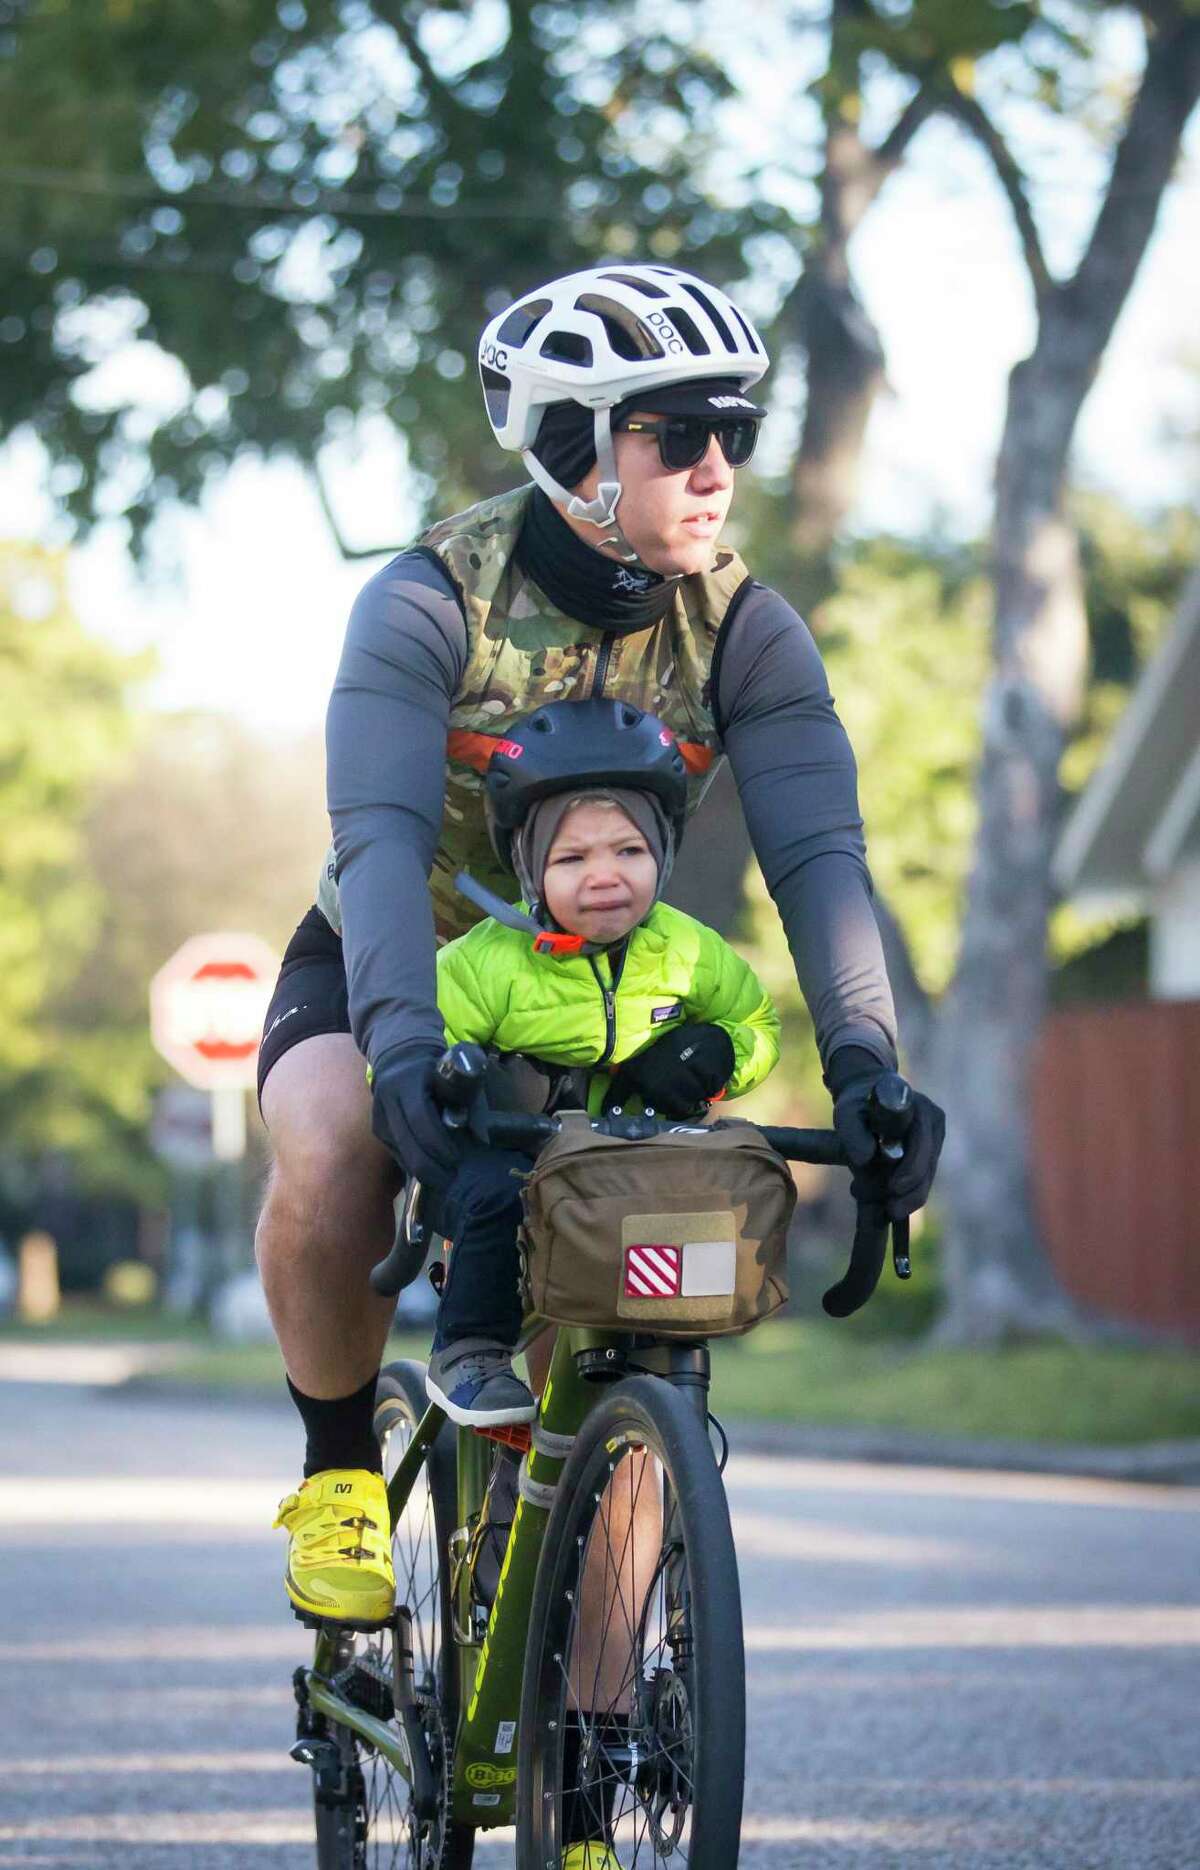 James Eilers rides with his 2.5-year-old son, Burton, during a morning group bike ride on Nov. 16, 2019, in the Heights. The family ride was organized by former pro cyclist Phil Gaimon and hosted by the Bicycle Speed Shop and Gaimon’s sponsor, Integrated Informatics Inc.